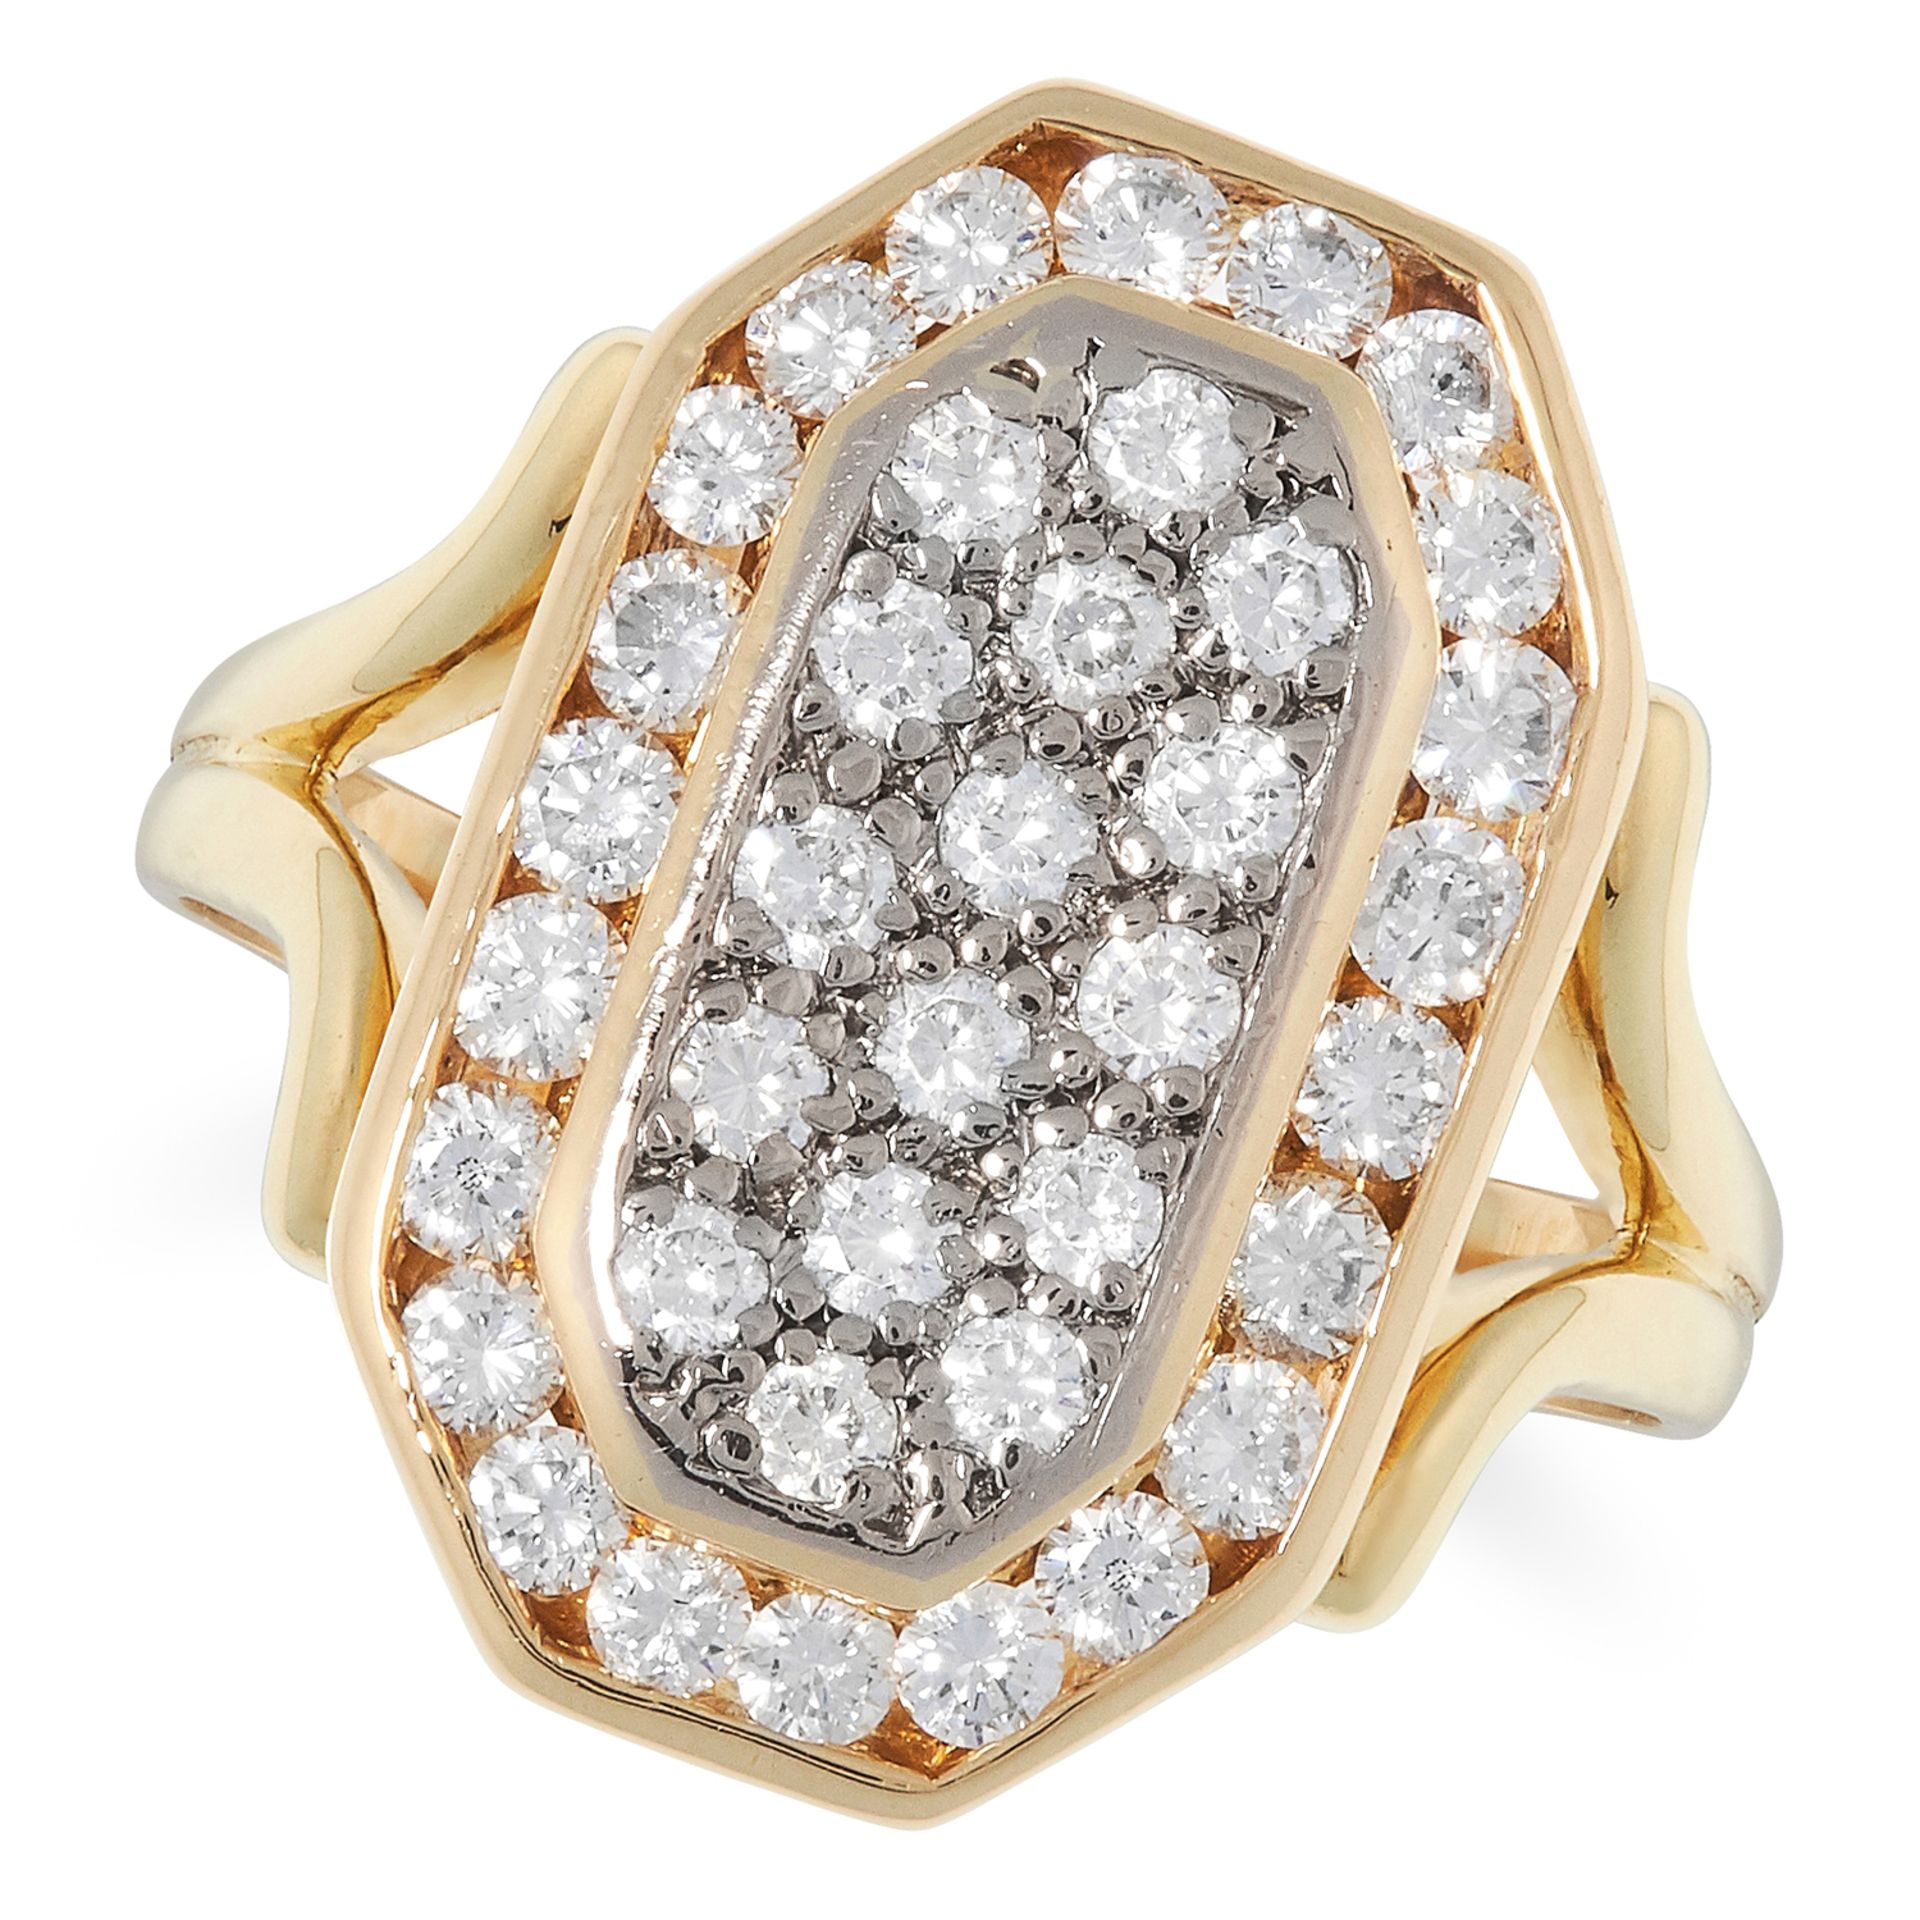 A DIAMOND DRESS RING, BOODLES the octagonal face pave set with round cut diamonds totalling 1.40